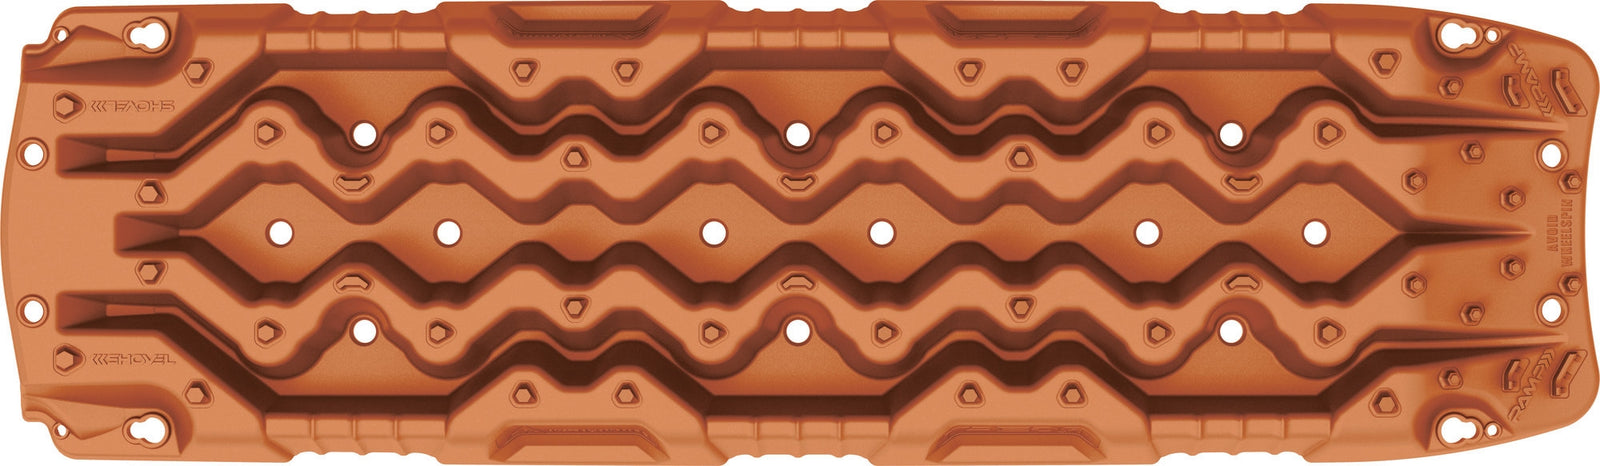 ARB Tred HD Recovery Boards, Bronze - Pair